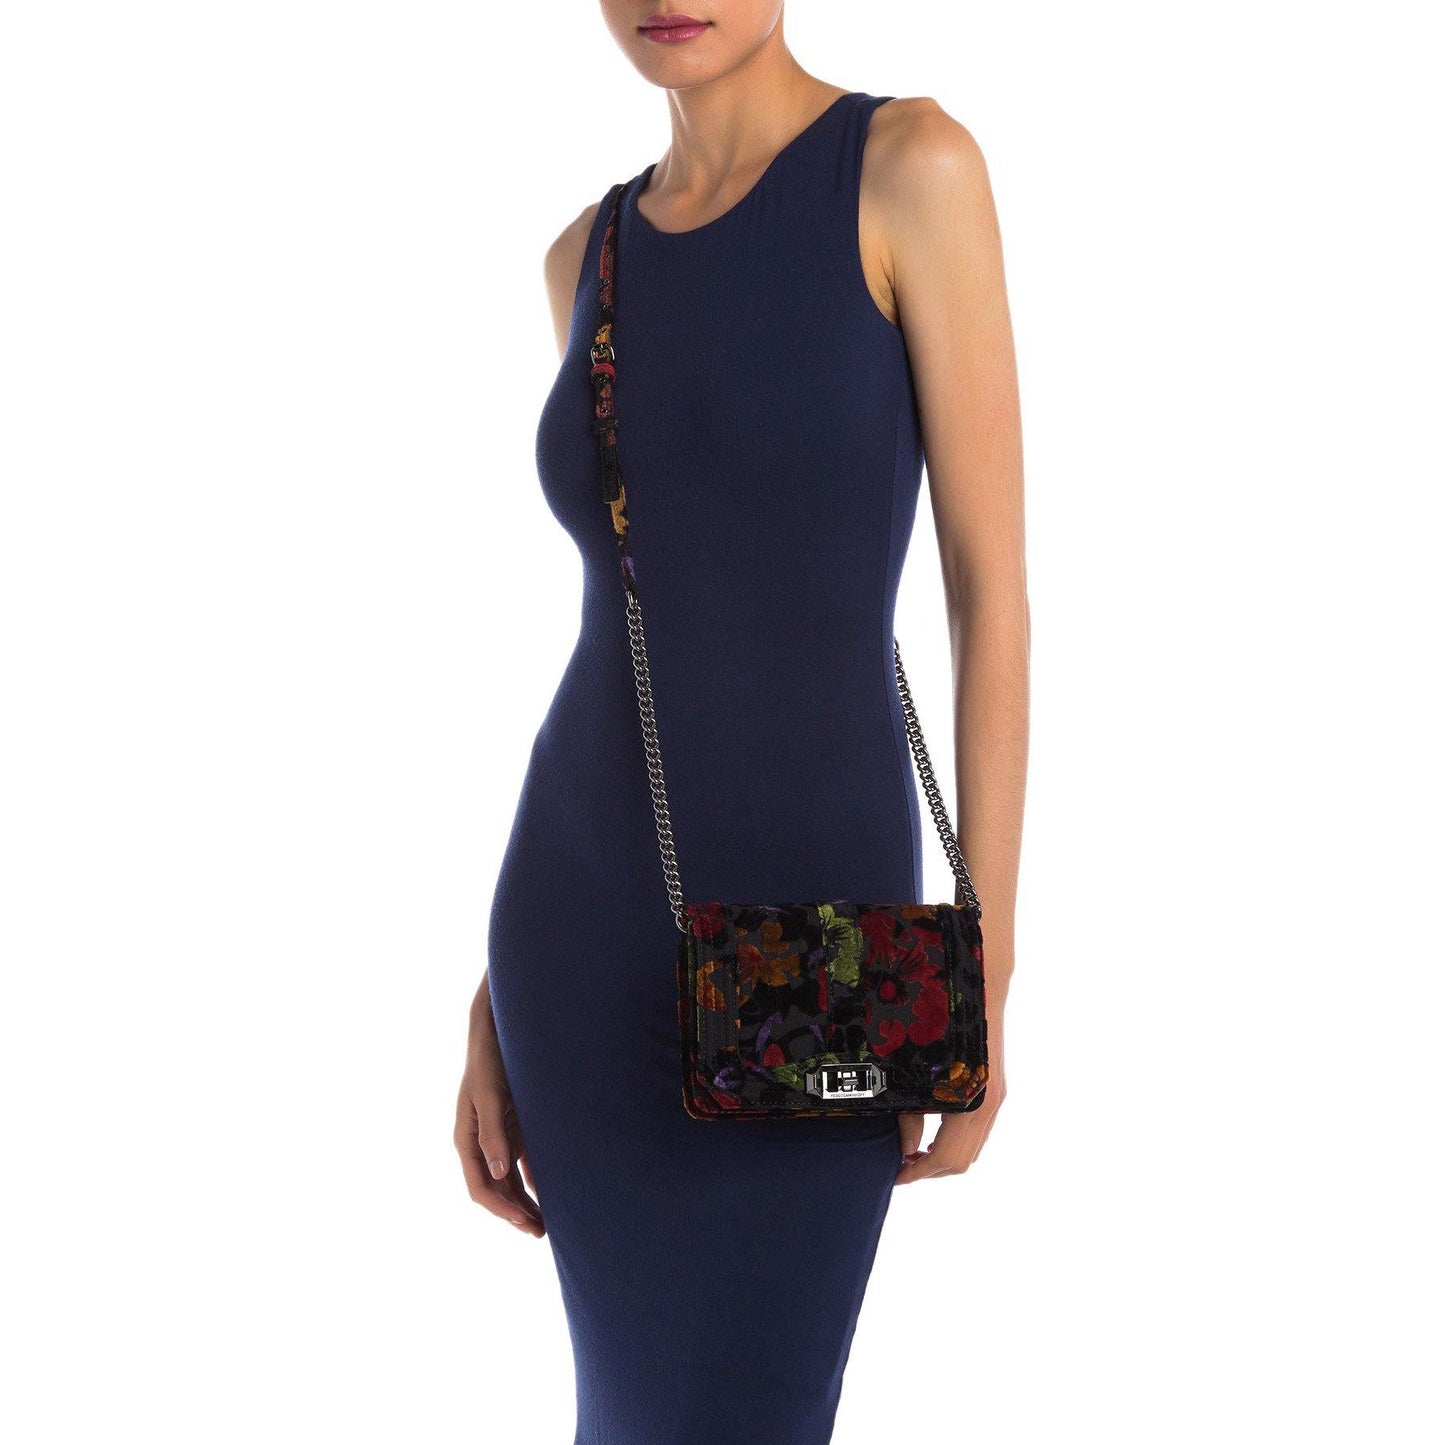 Small Love Crossbody - Cosmos Boutique New Jersey